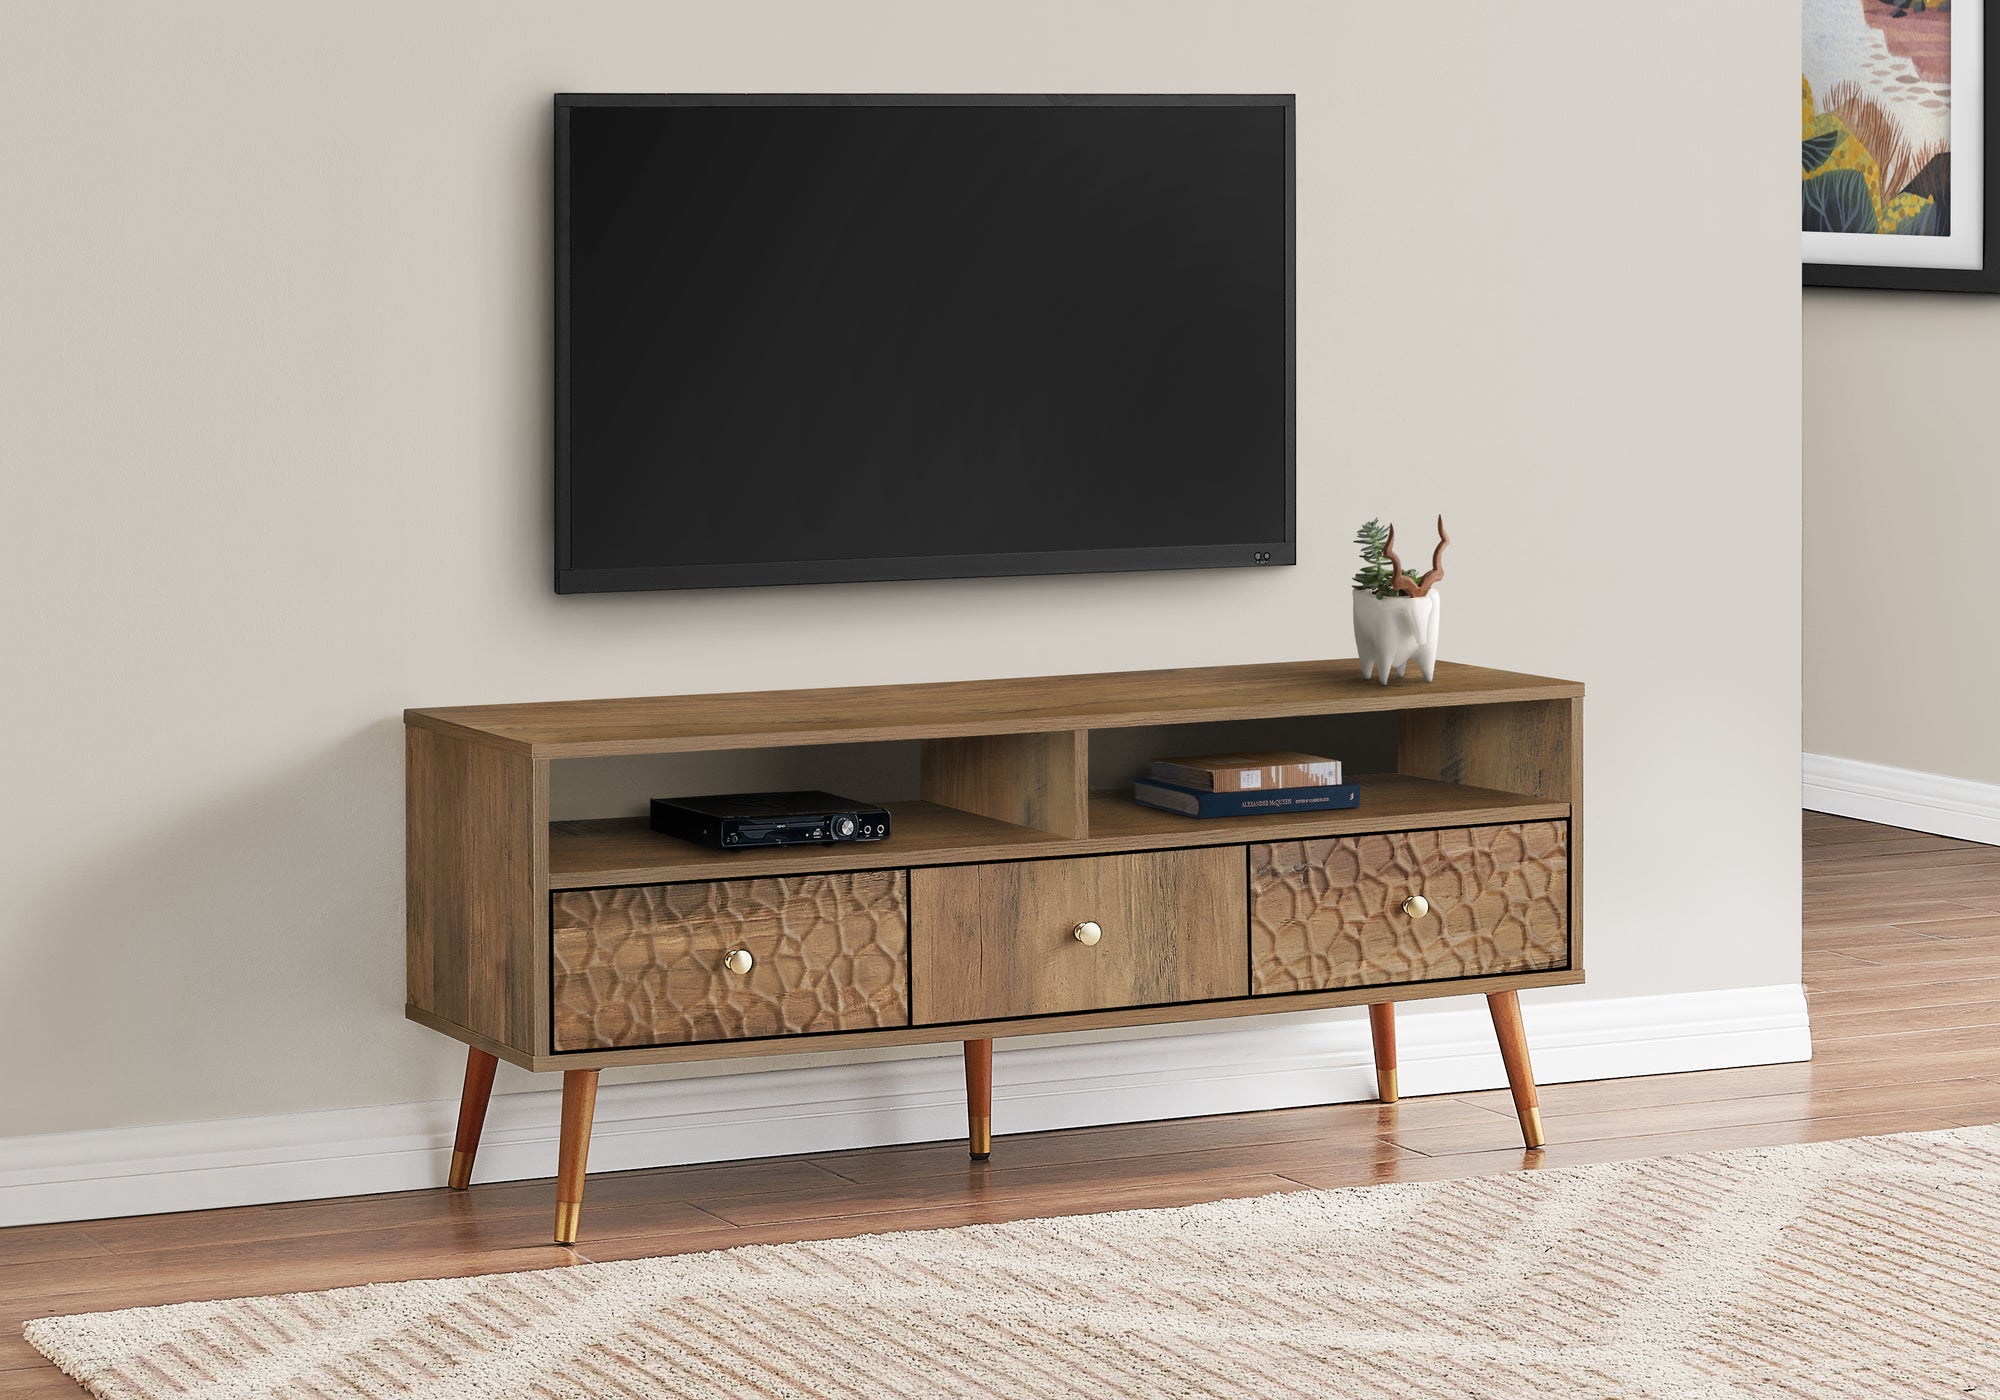 I 2835 - TV STAND - 48"L / WALNUT MID-CENTURY WITH 3 DRAWERS BY MONARCH SPECIALTIES INC